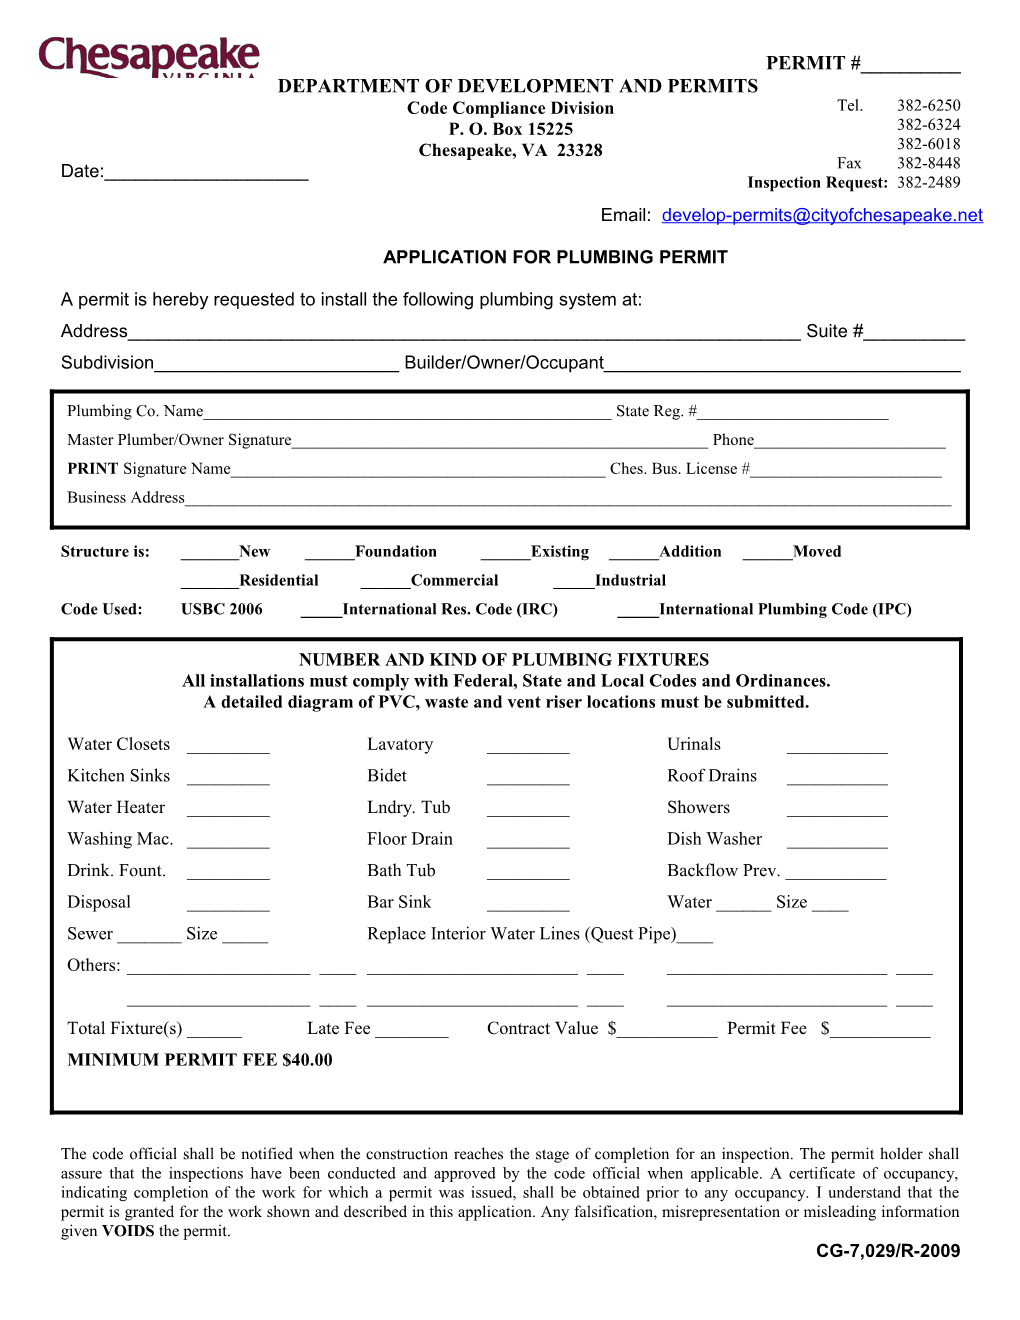 Application for Plumbing Permit